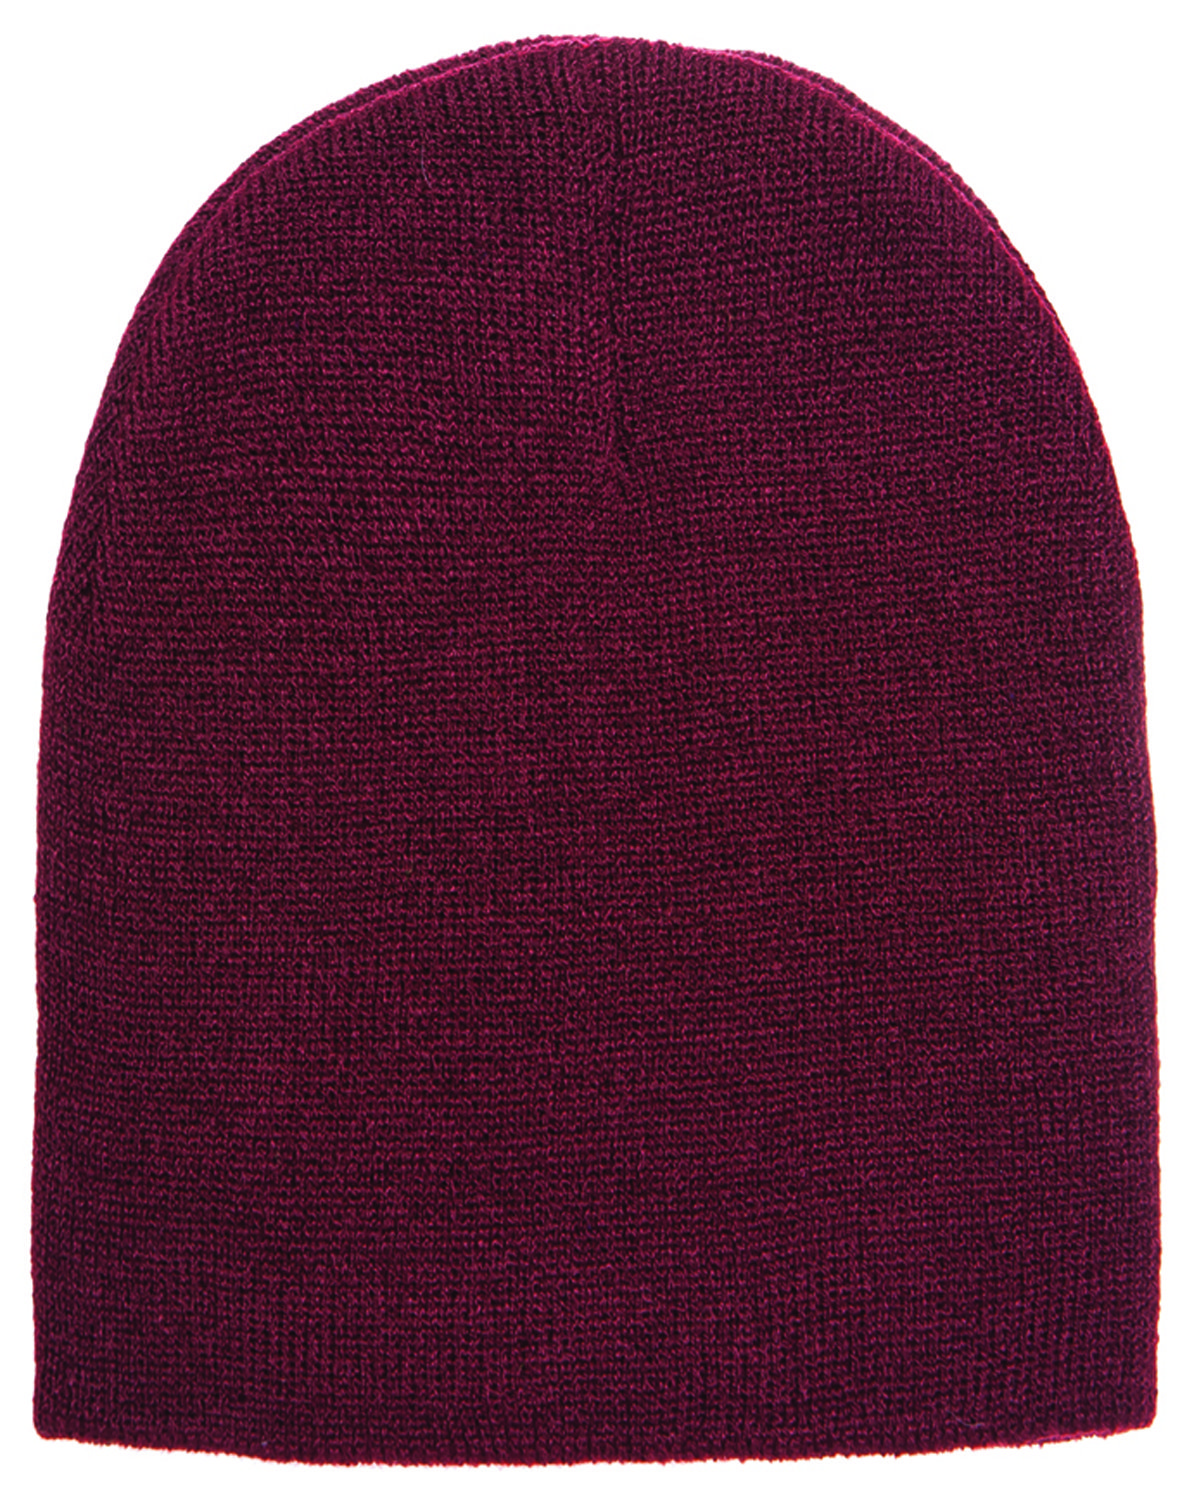 Adult Yupoong Beanie Knit alphabroder |